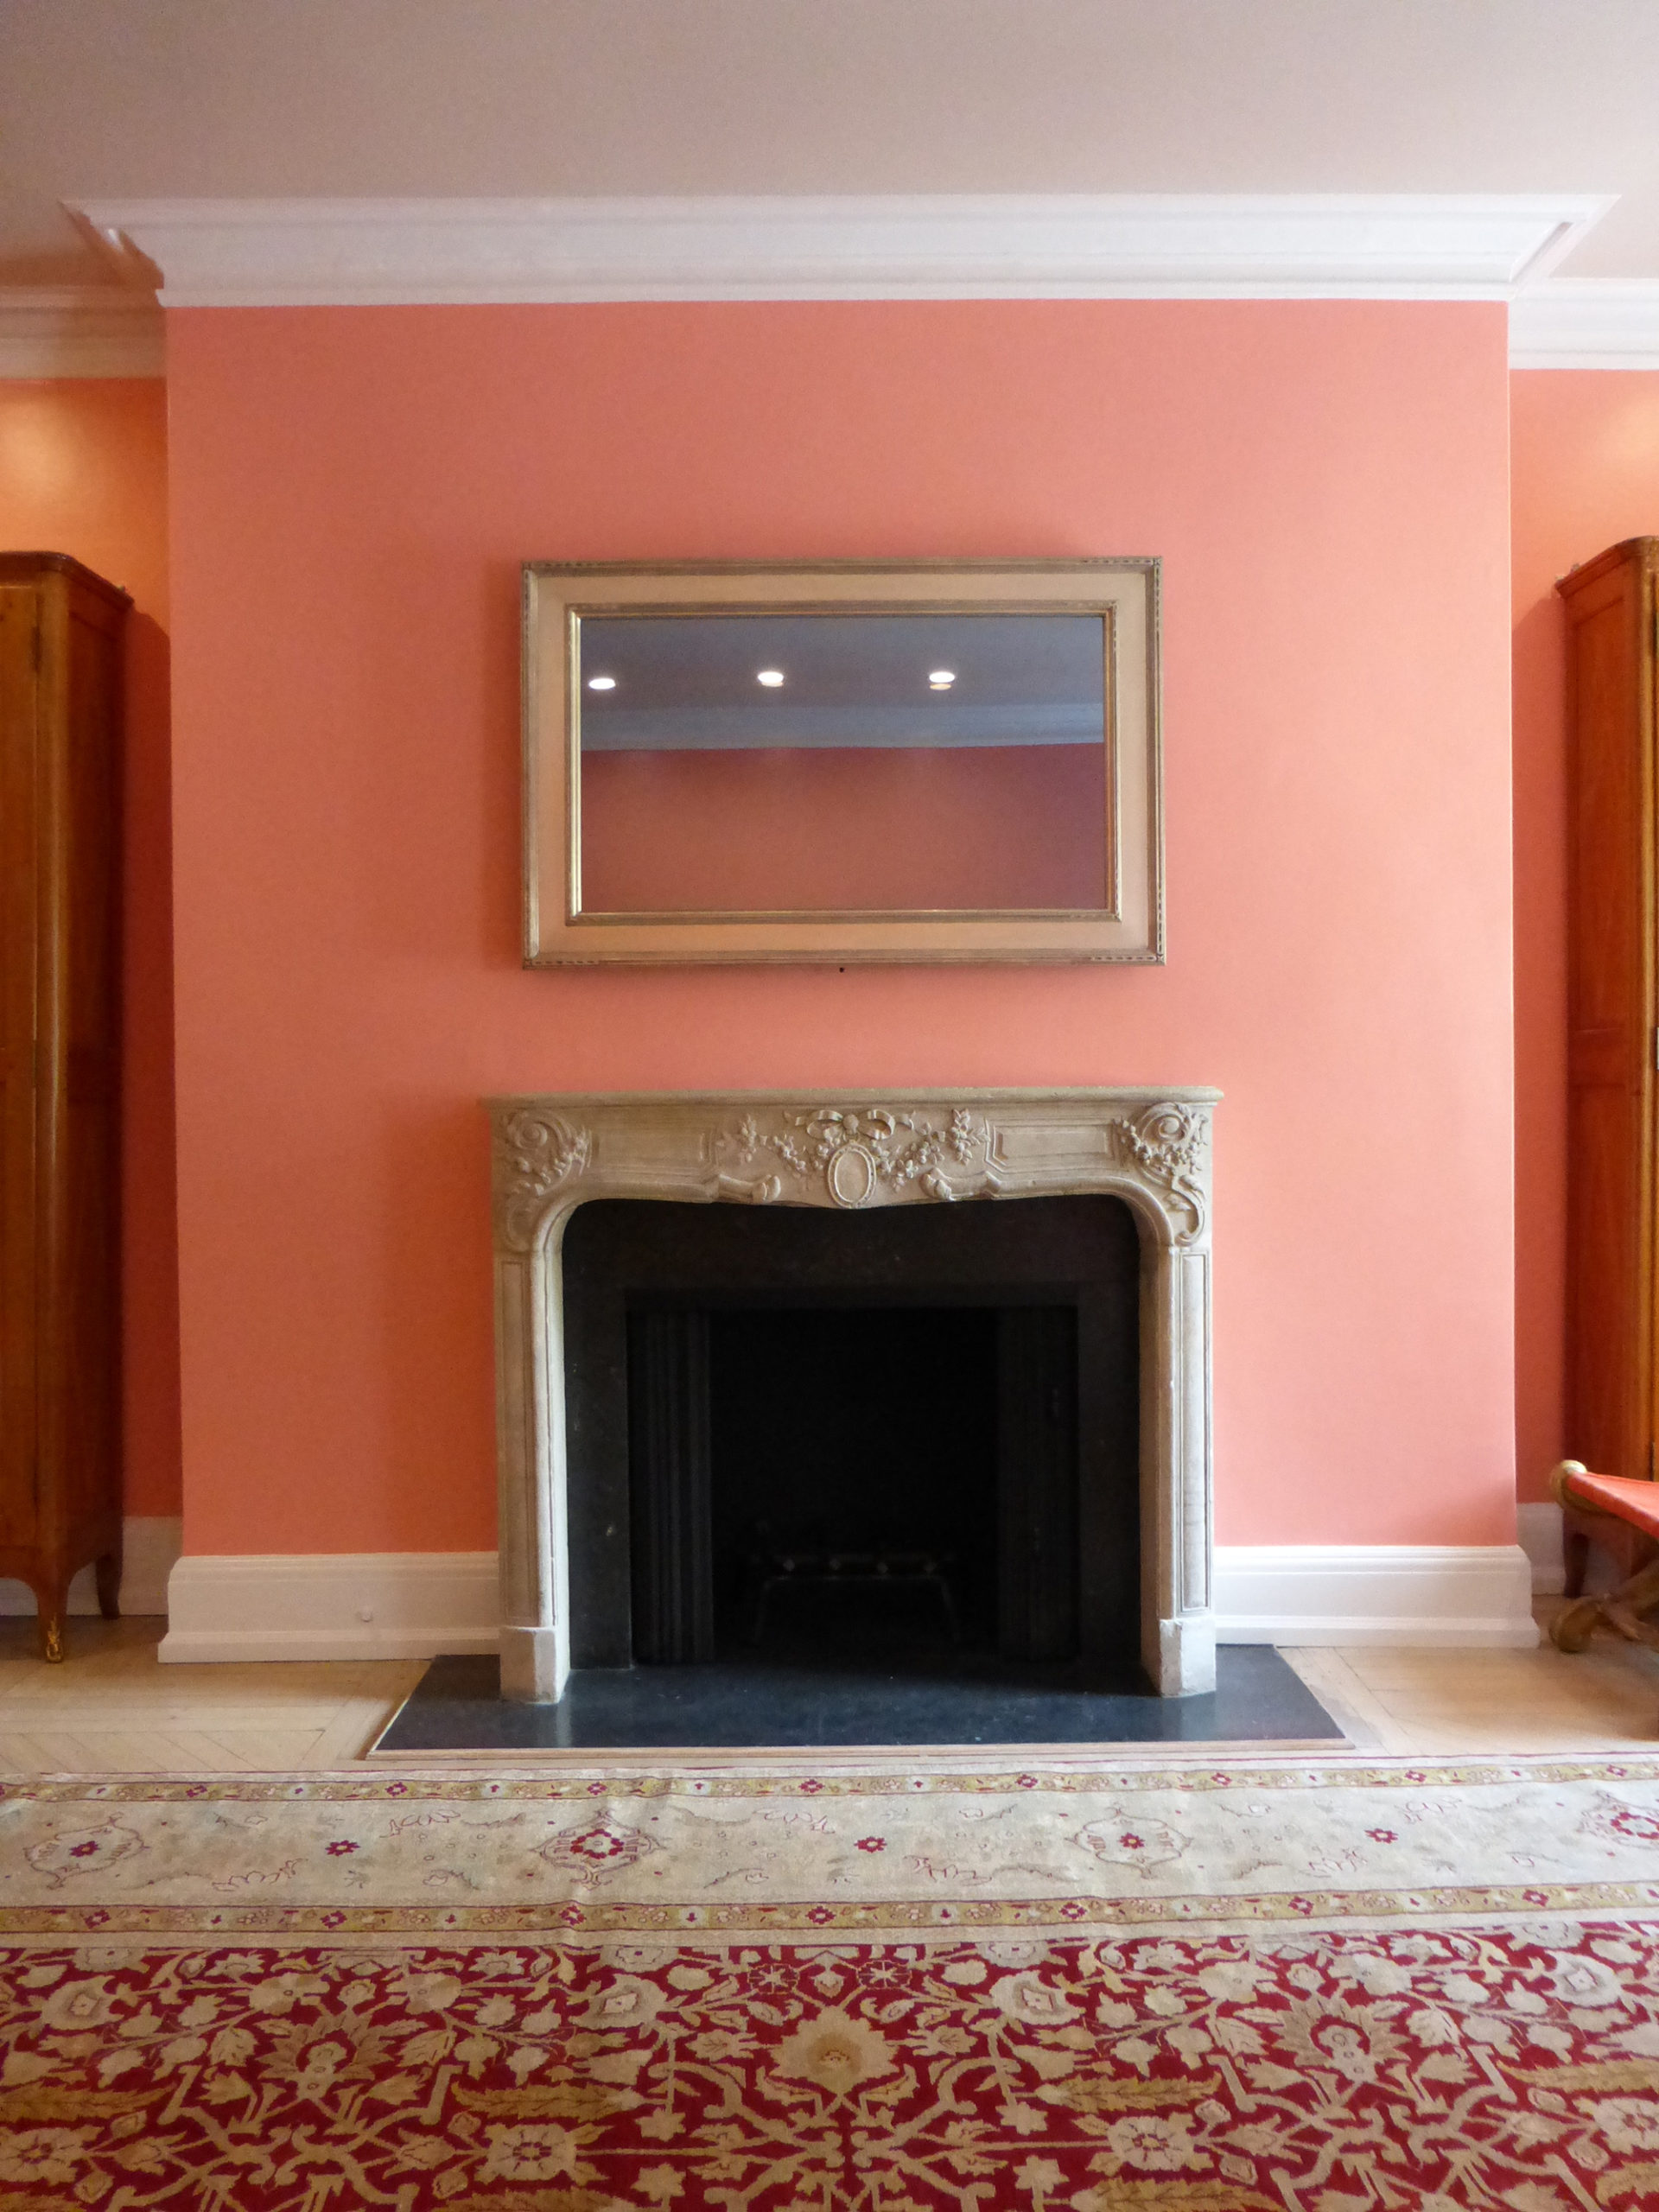 gold reflectel mirror tv over stone mantle on peach wall